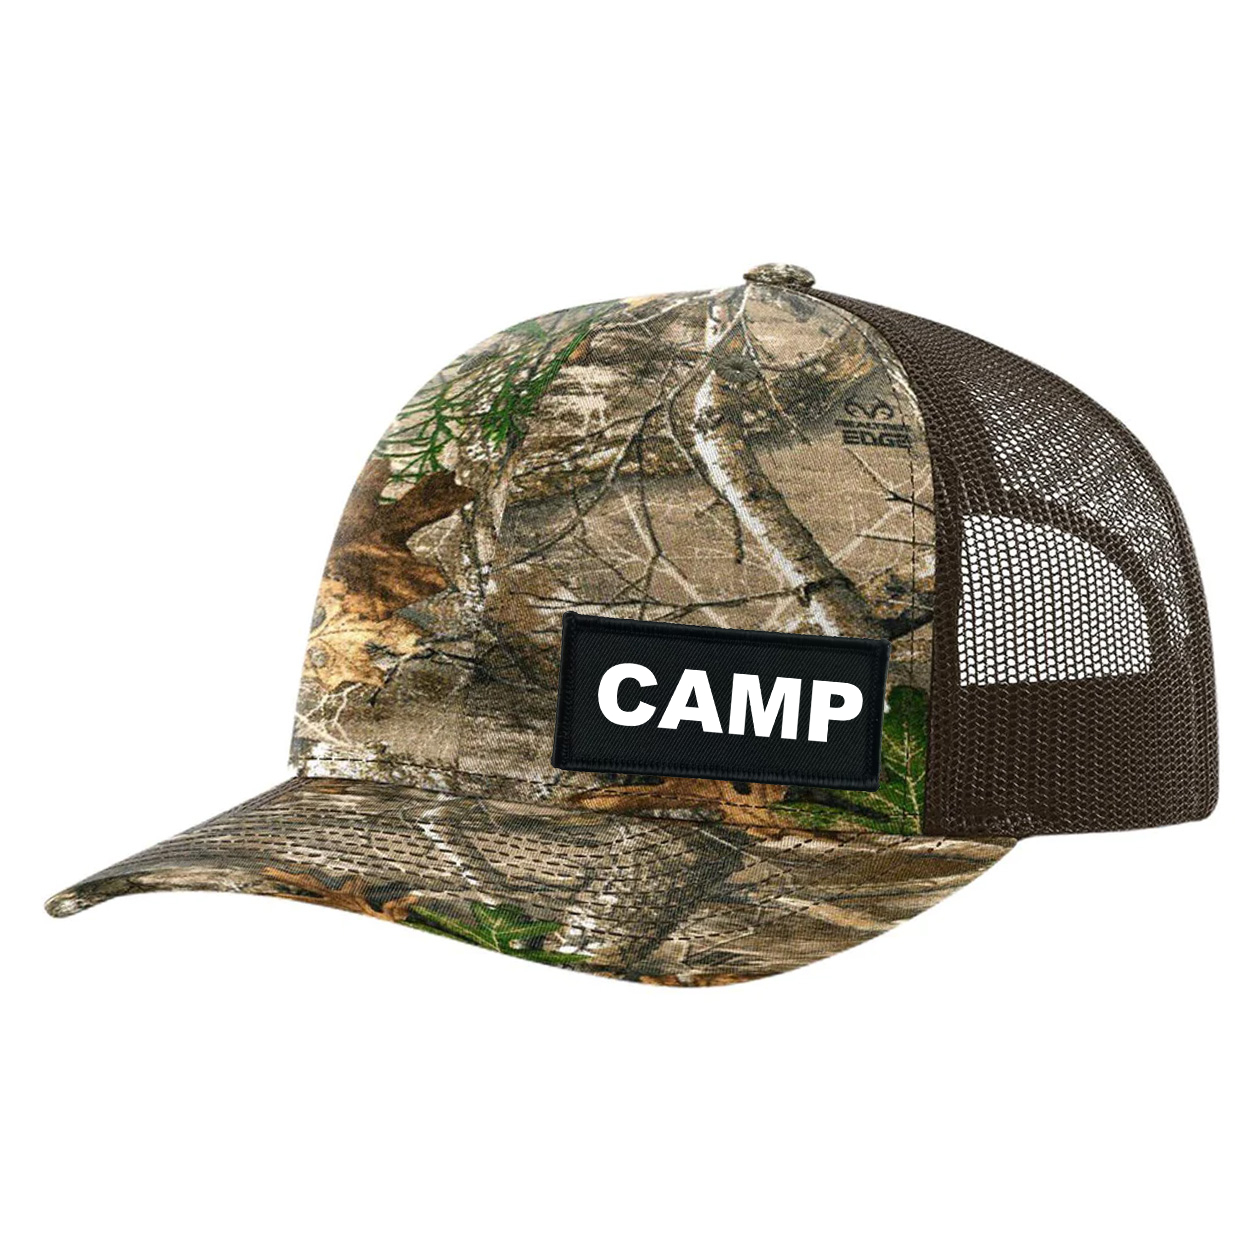 Camp Brand Logo Night Out Woven Patch Snapback Trucker Hat Realtree Edge/ Brown